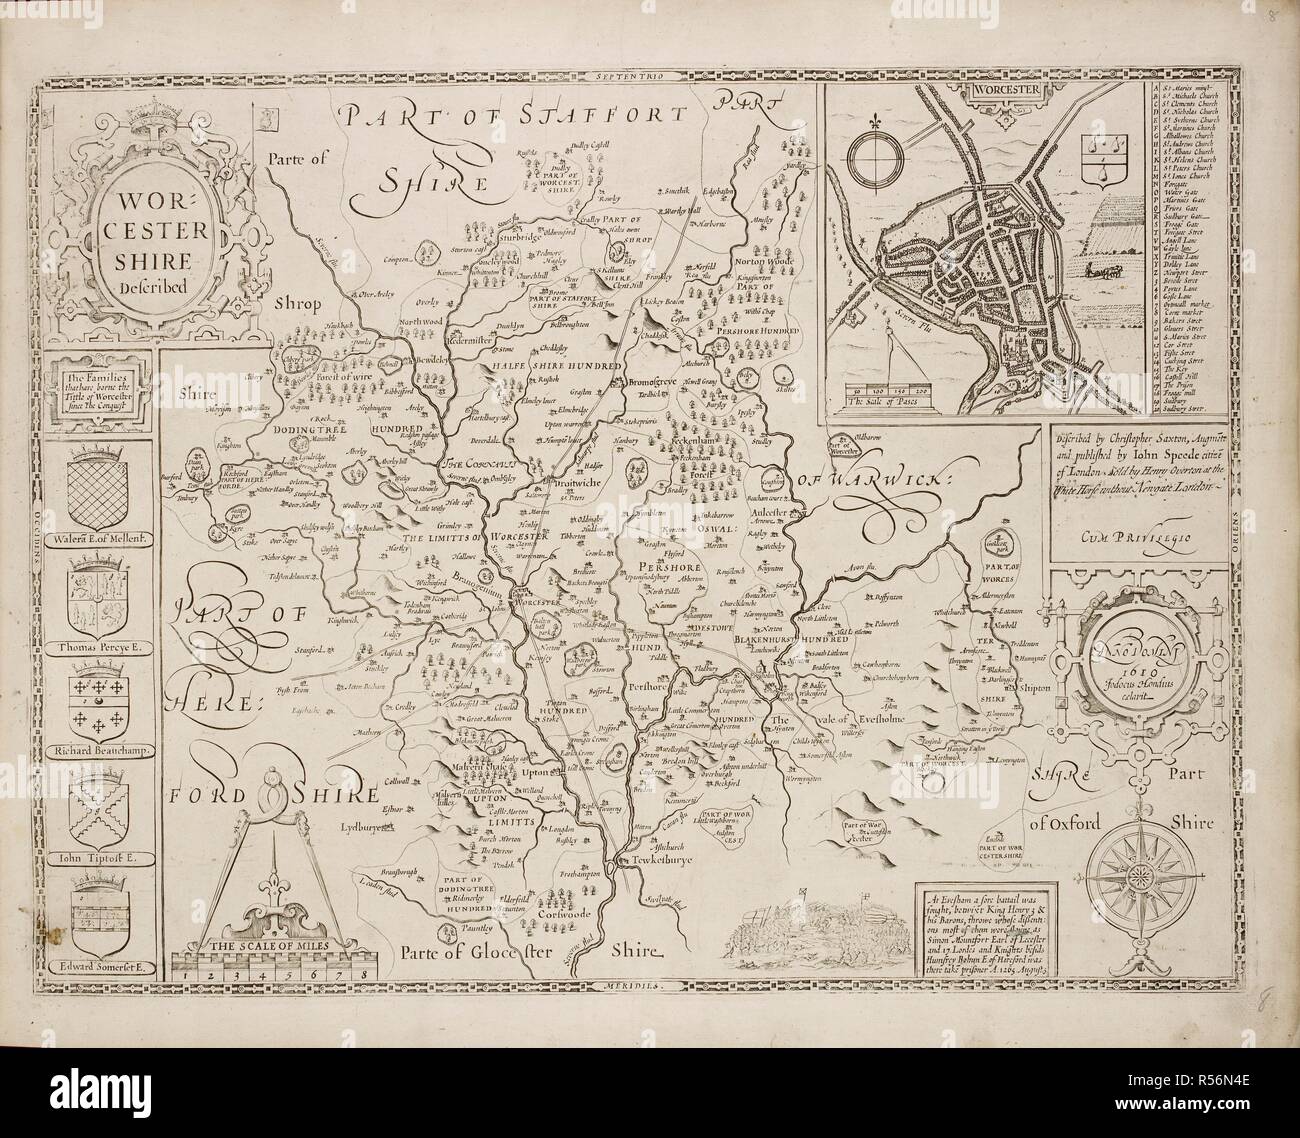 A map of the county of Worcestershire. Coats of arms and topographical information. . A collection of 37 Maps of the counties of England. London. H. Overton, 1714. A collection of 37 Maps of the counties of England, being reprints, of J. Speedâ€™s maps, by Henry Overton, together with those of P. Stent reprinted by John Overton, and maps of Derbyshire and Yorkshire engraved by S. Nicholls. Source: Maps.145.c.9 8. Language: English. Stock Photo